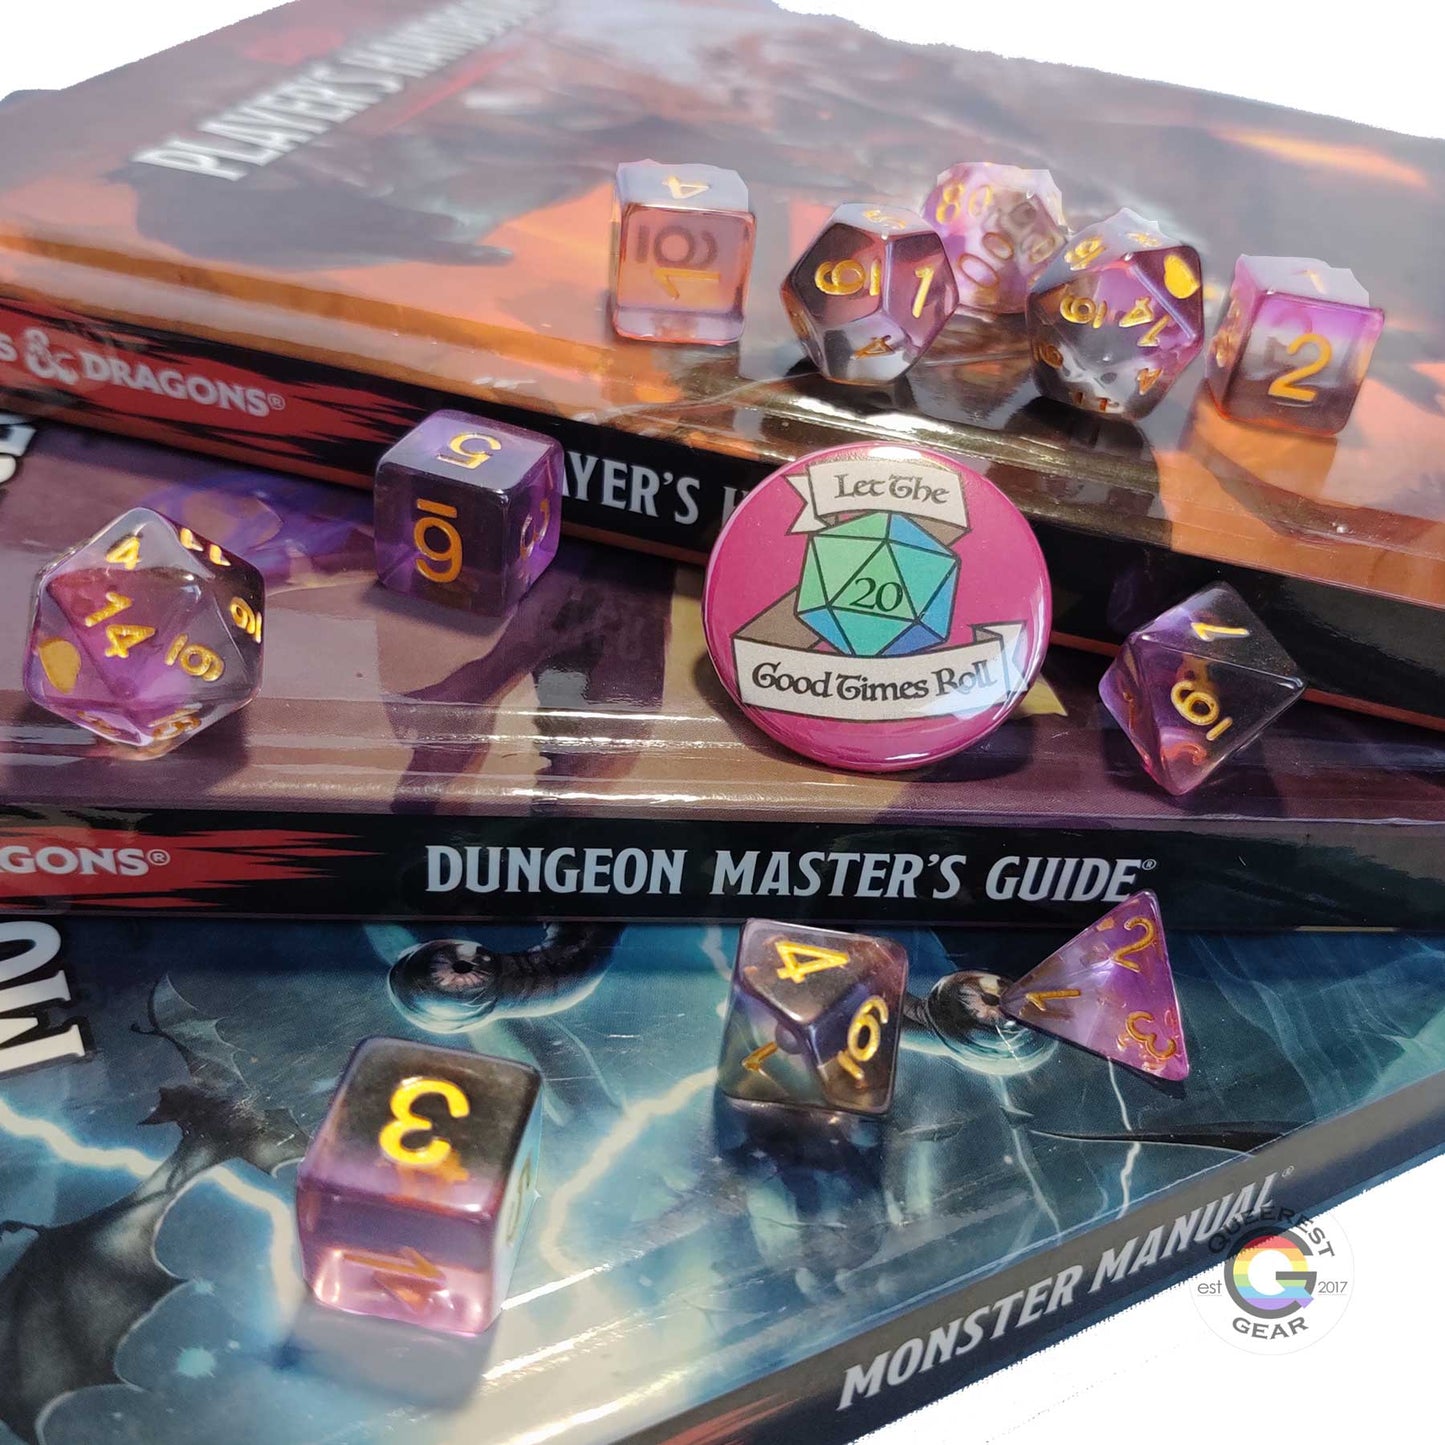 11 piece set of polyhedral dice scattered on a a stack of d&d books. They are transparent and colored in the stripes of the asexual flag with gold ink